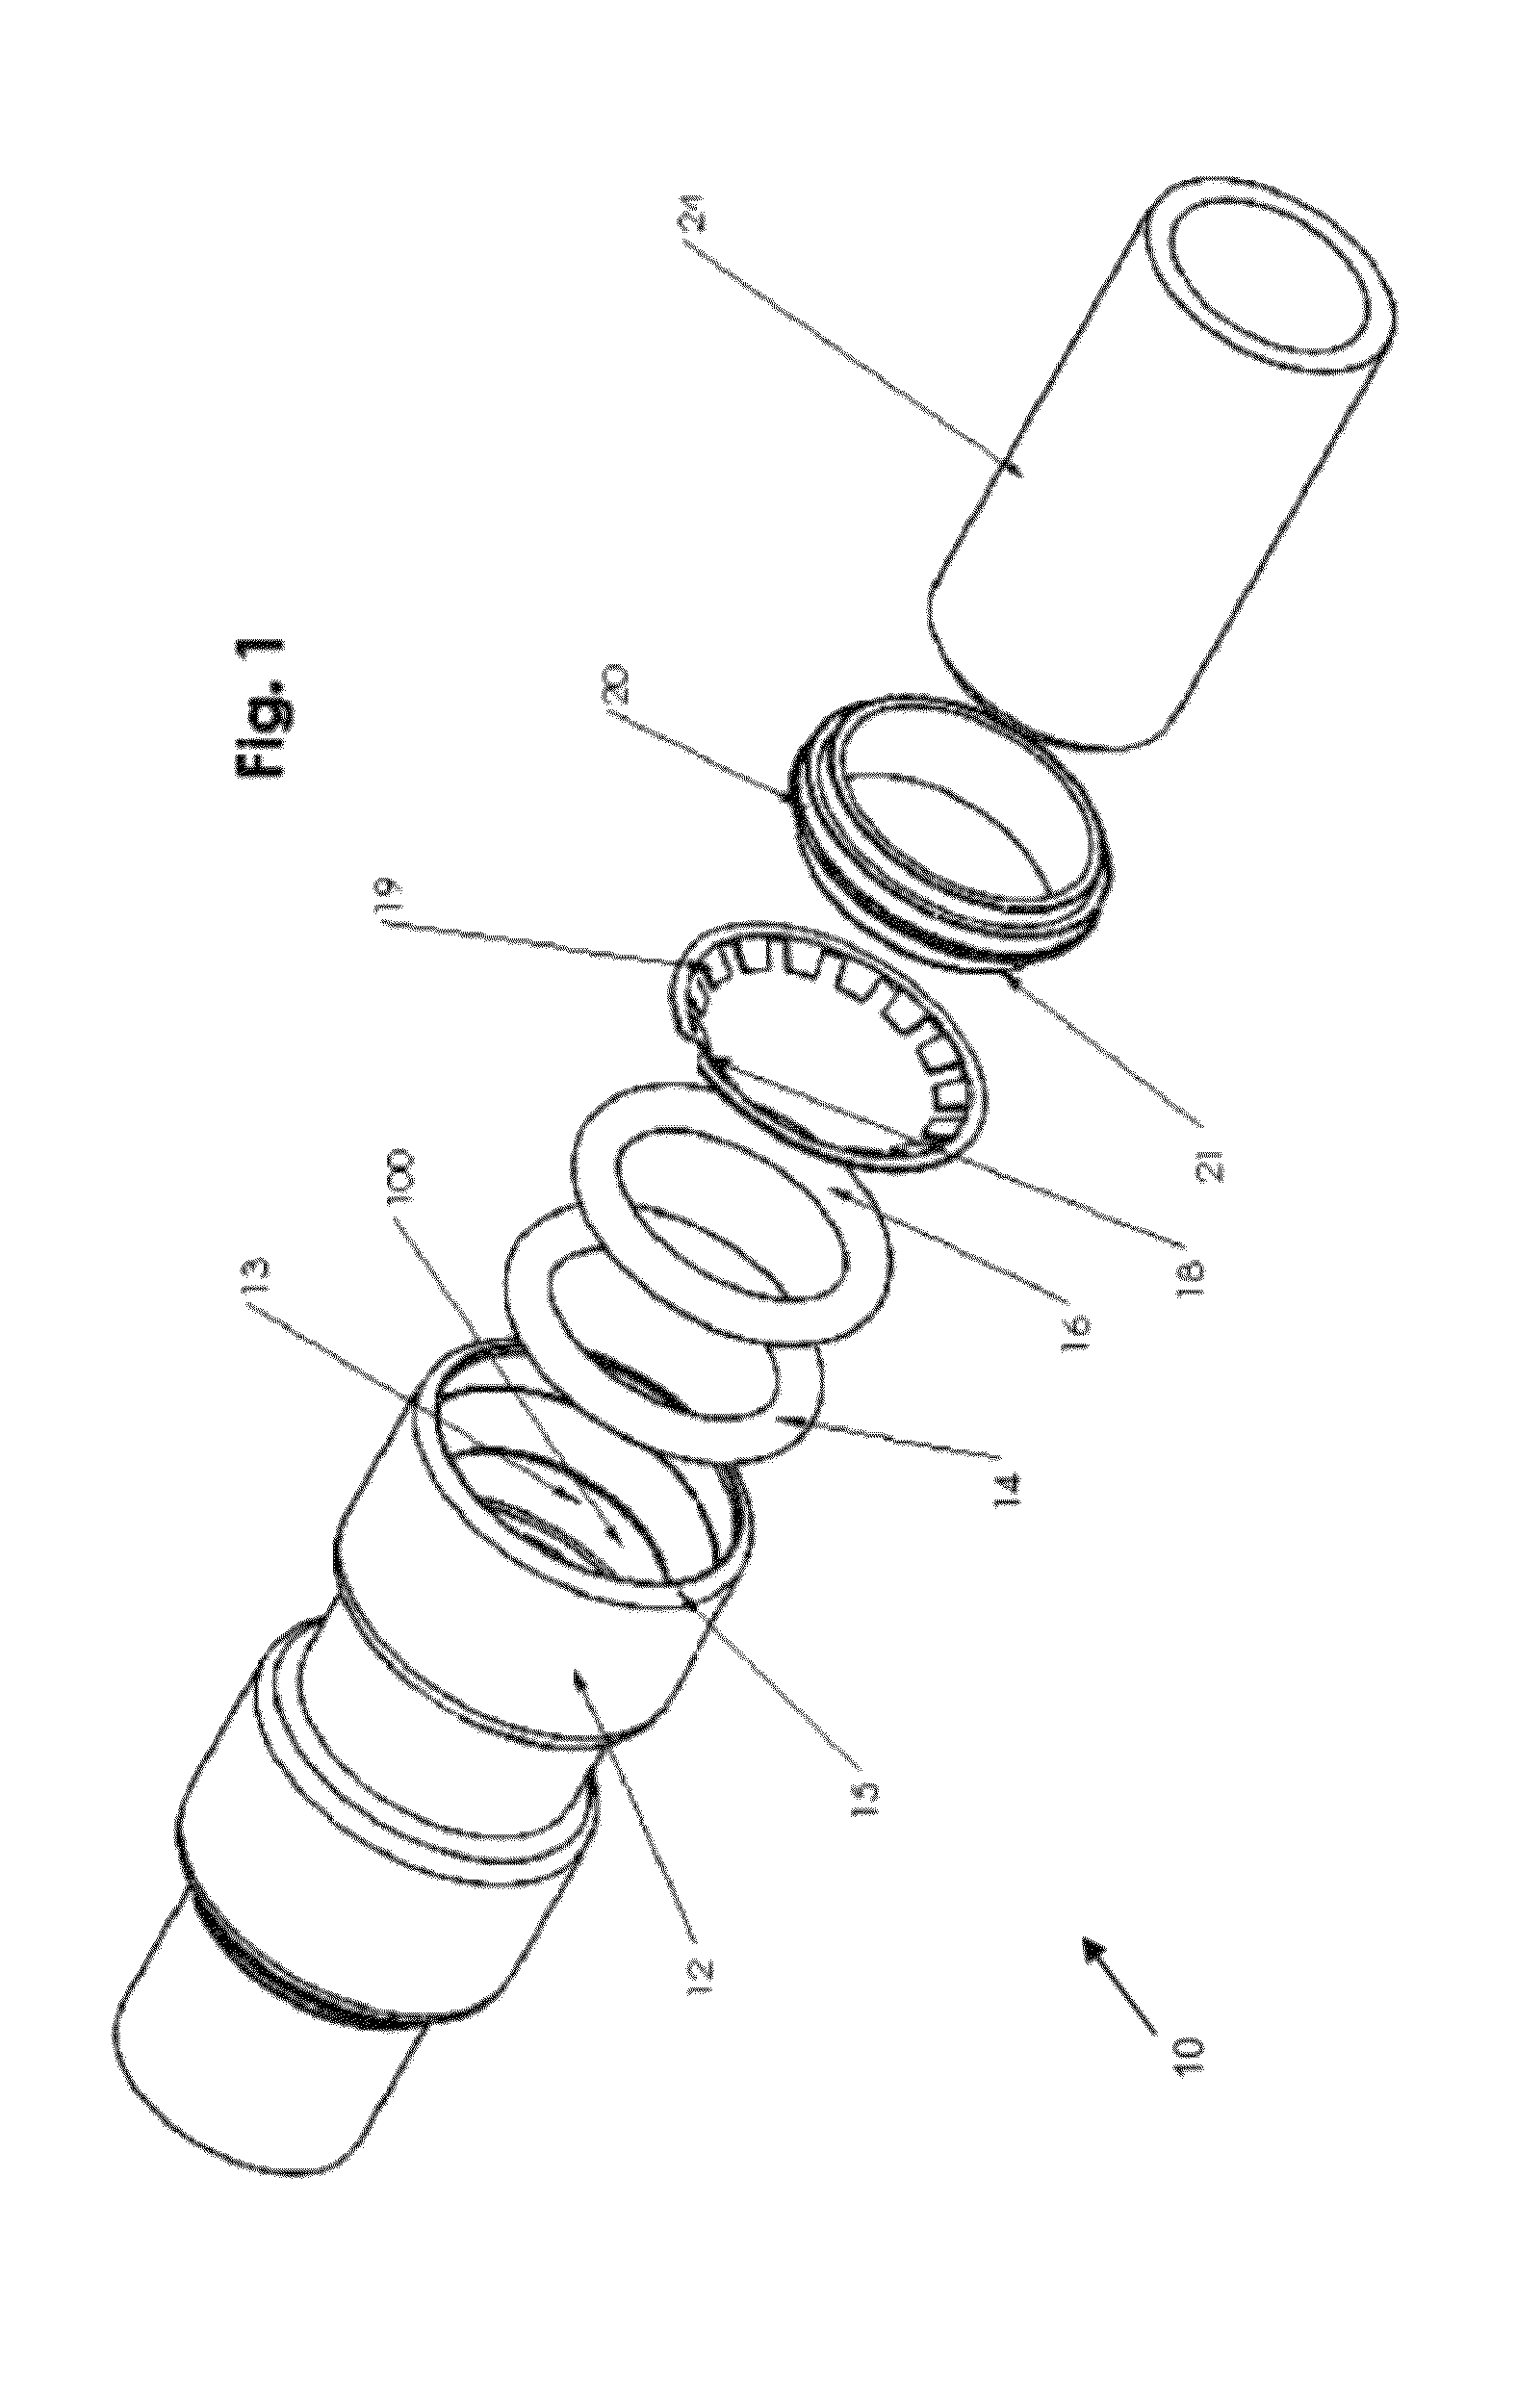 Piping joint assembly system and method